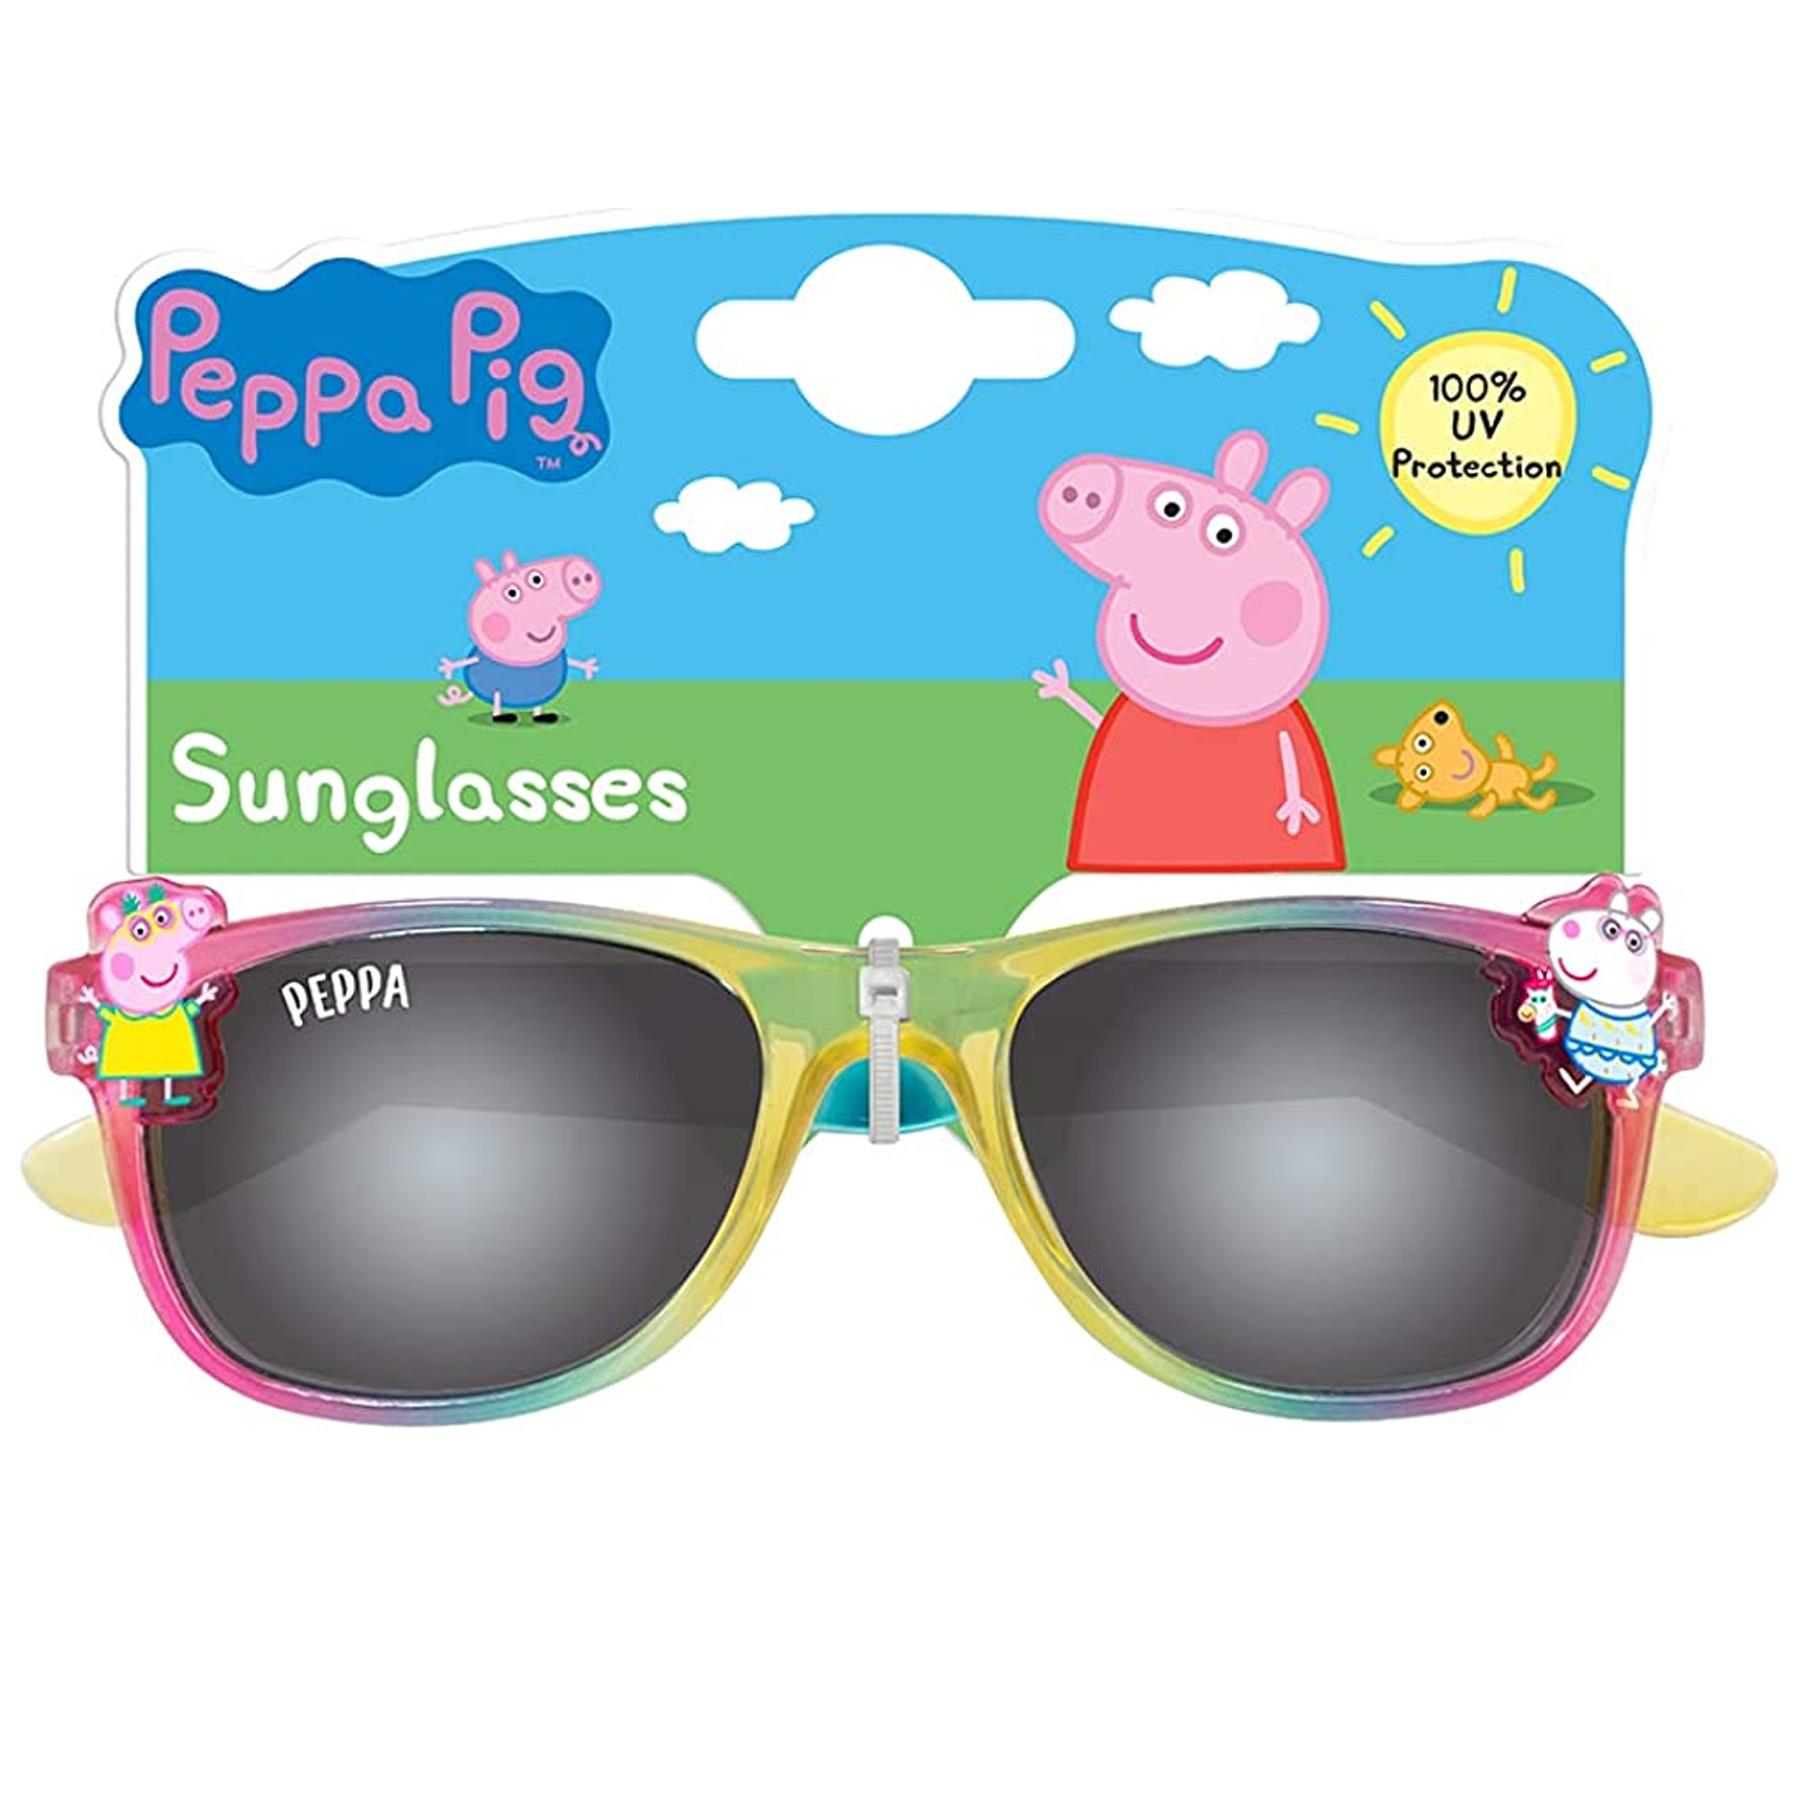 Peppa Pig Children's Character Sunglasses UV protection for Holiday - PEPPA9